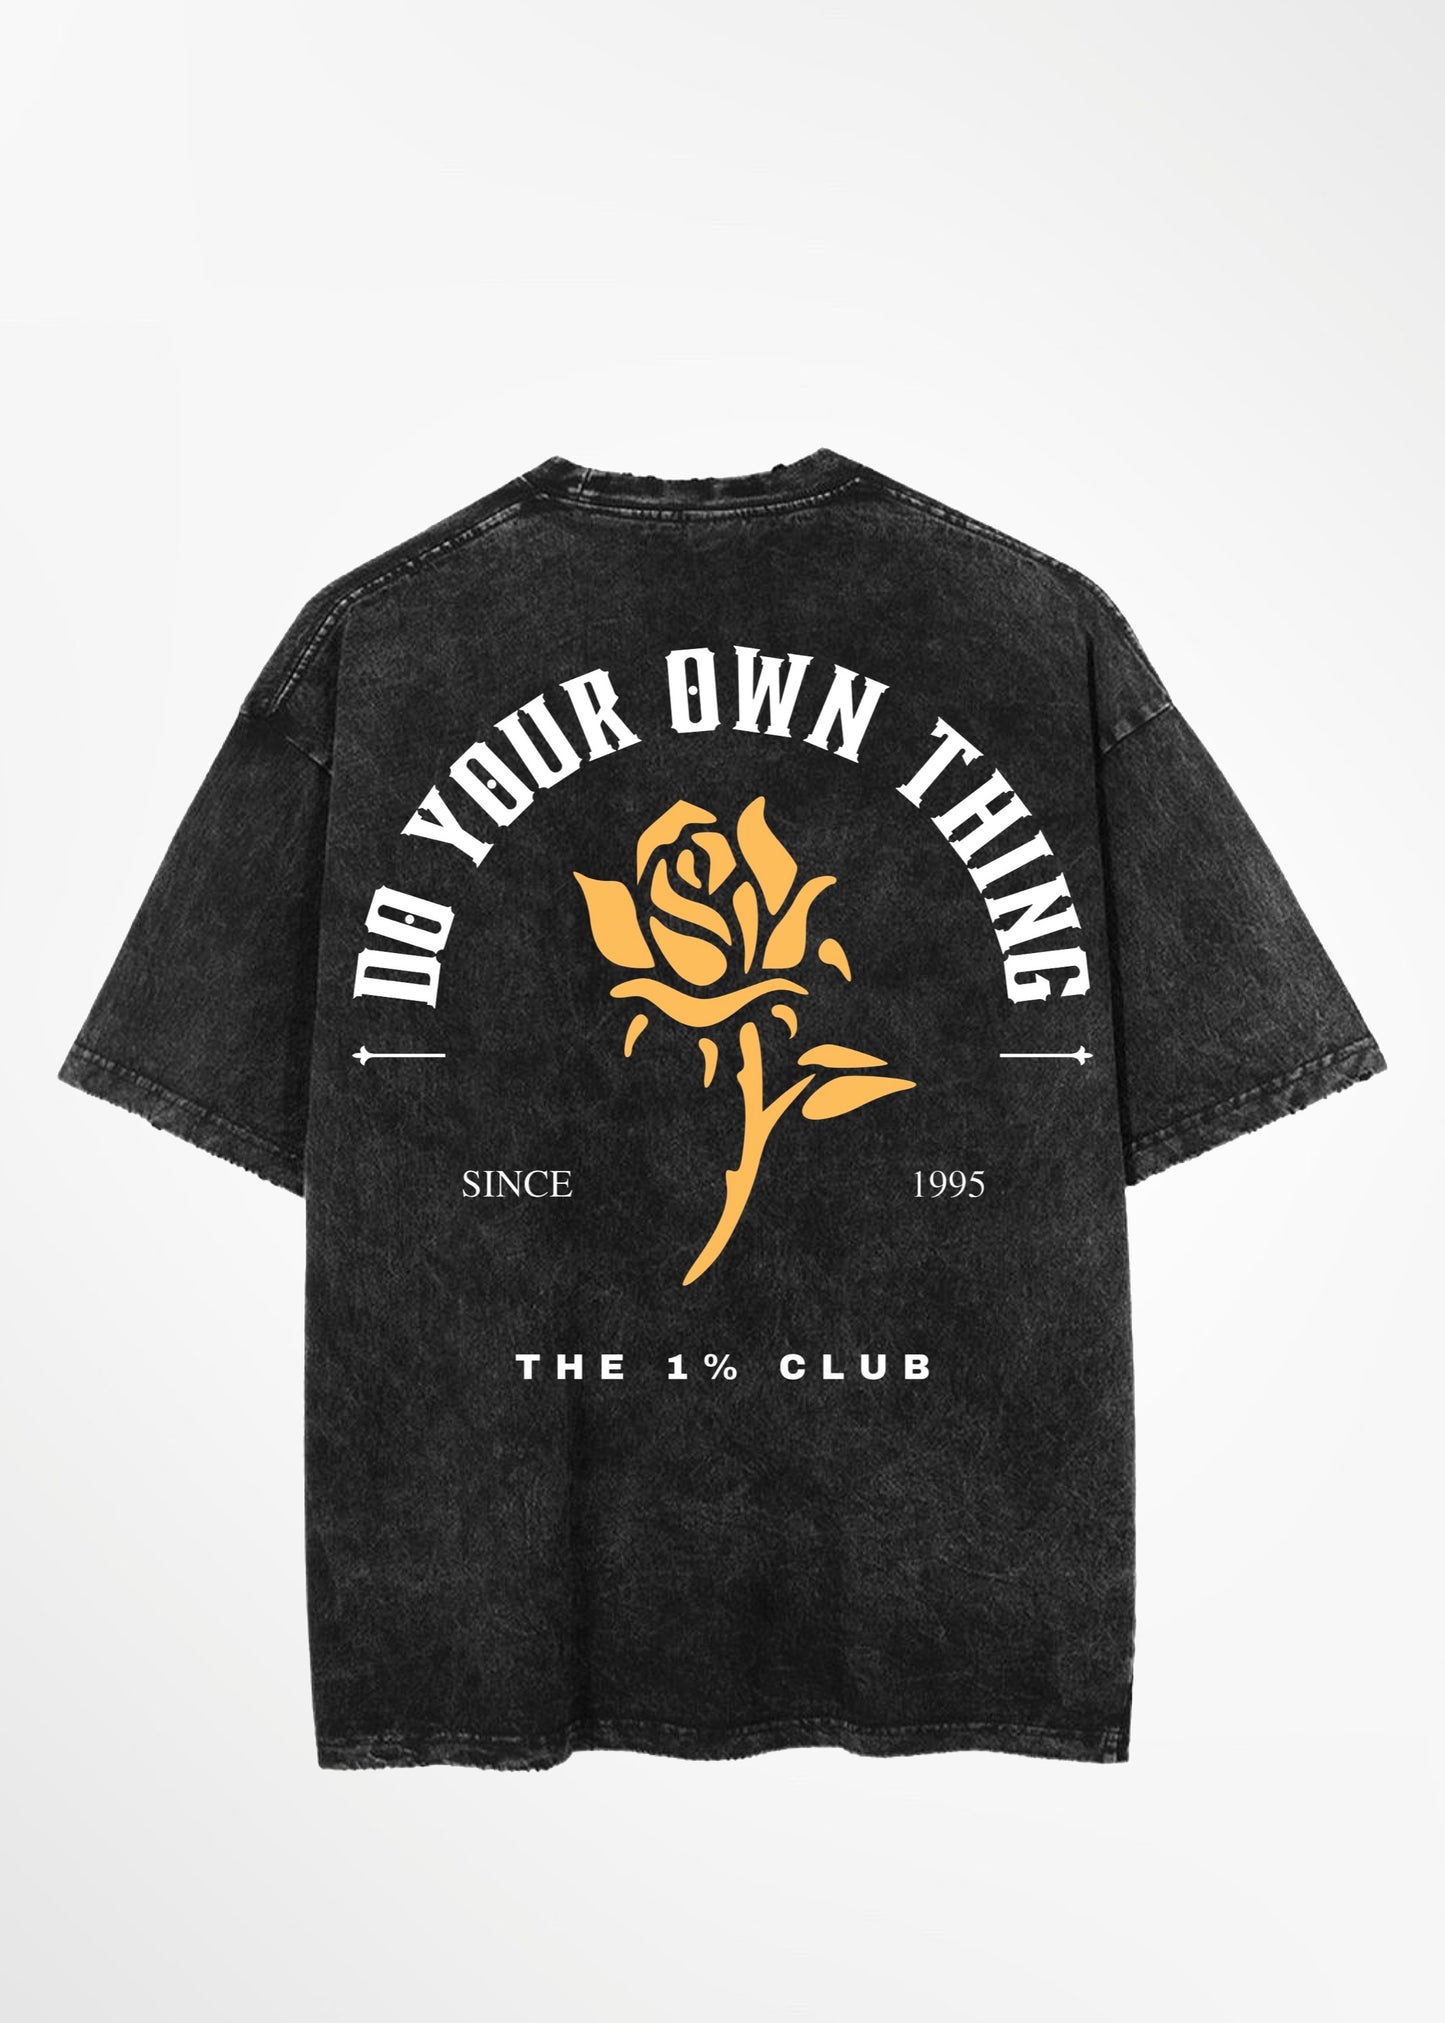 The 1% club drop! Limited Edition